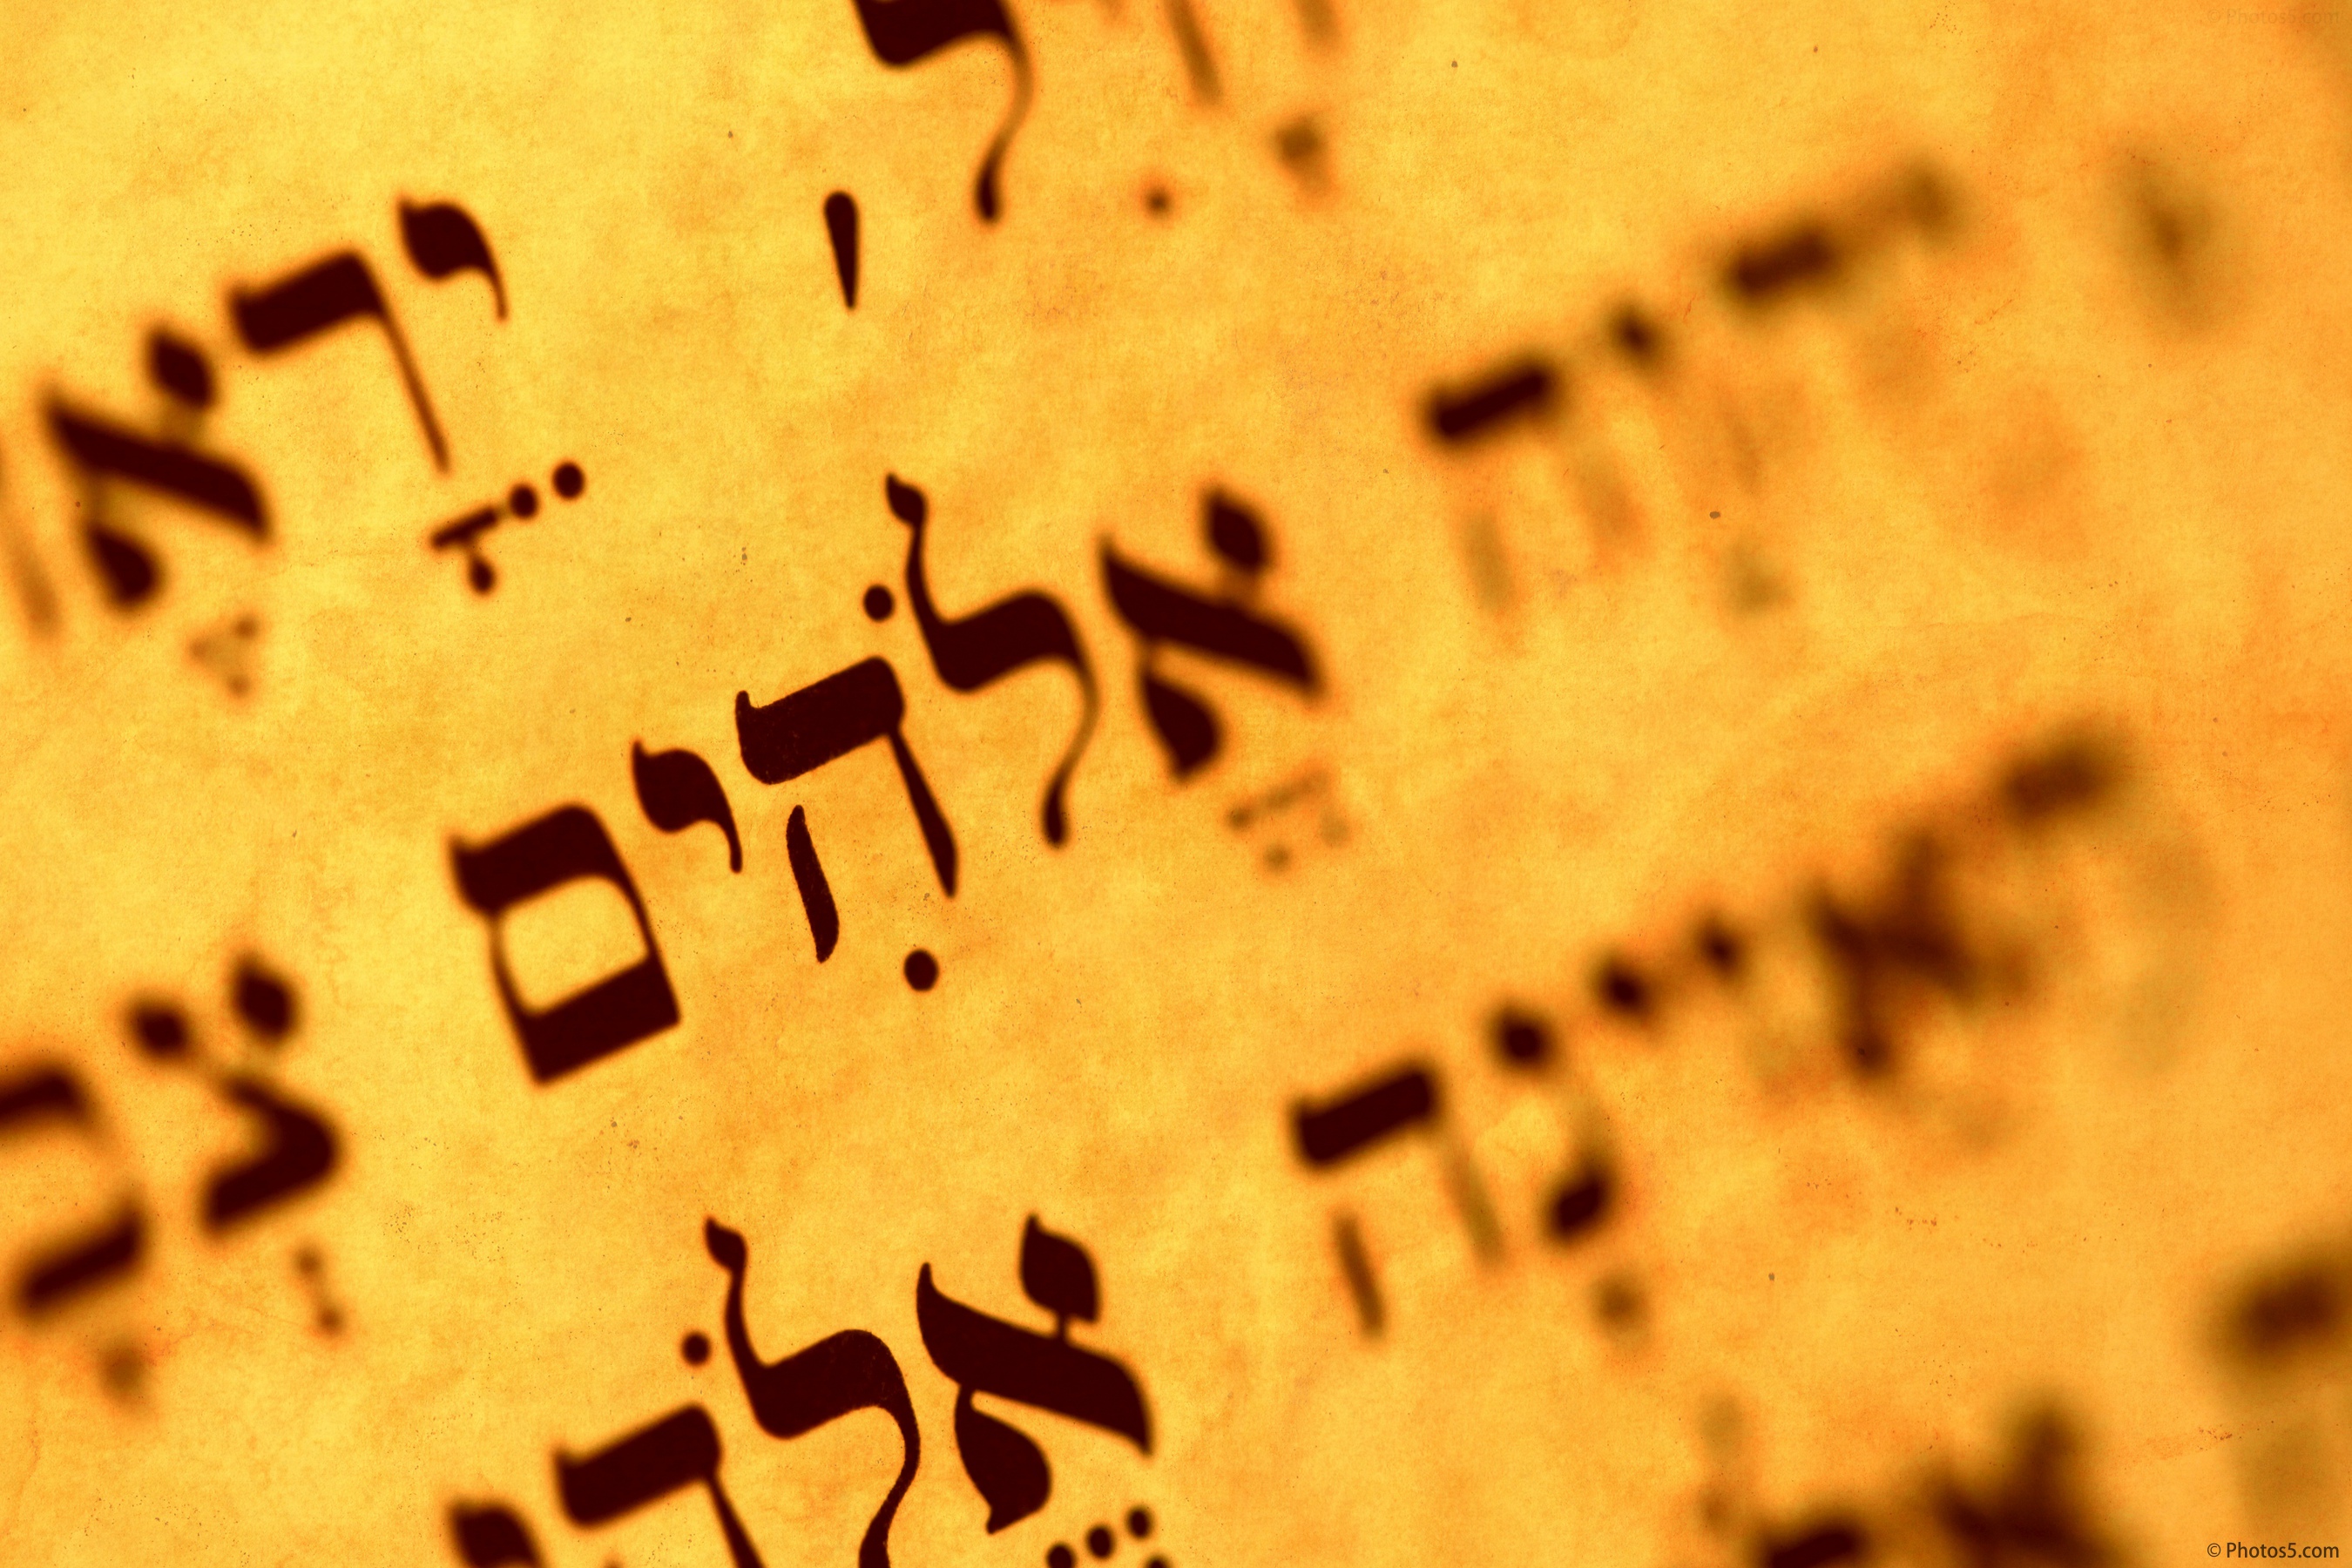 Elohim-Name-in-Hebrew-from-Jewish-Bible.jpg?profile=RESIZE_710x